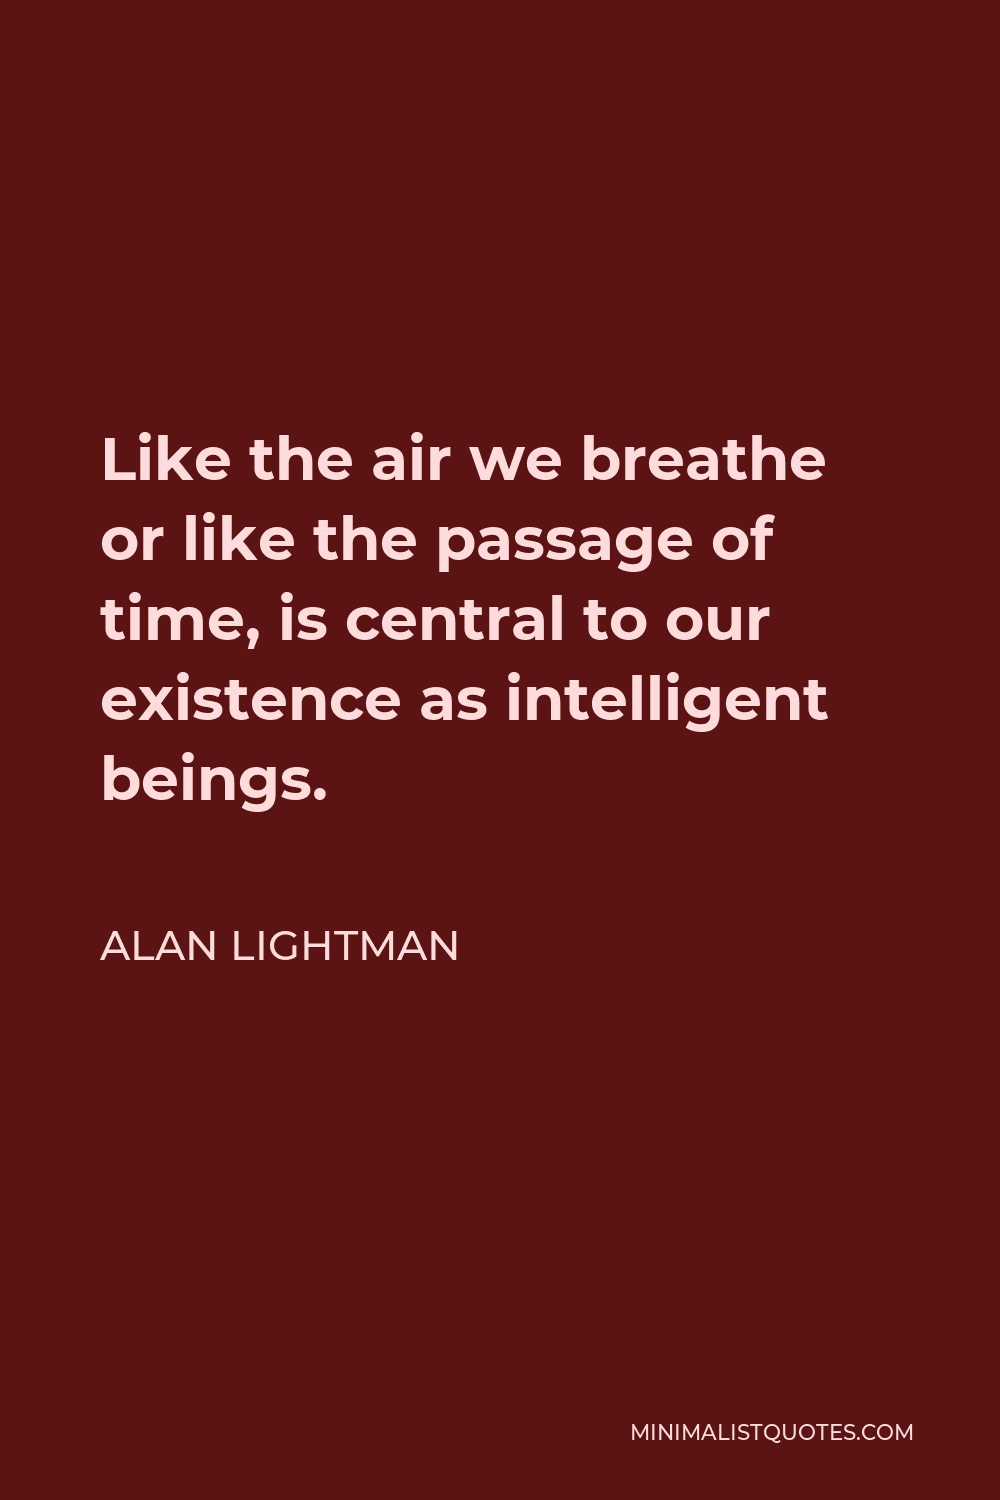 Alan Lightman Quote - Like the air we breathe or like the passage of time, is central to our existence as intelligent beings.